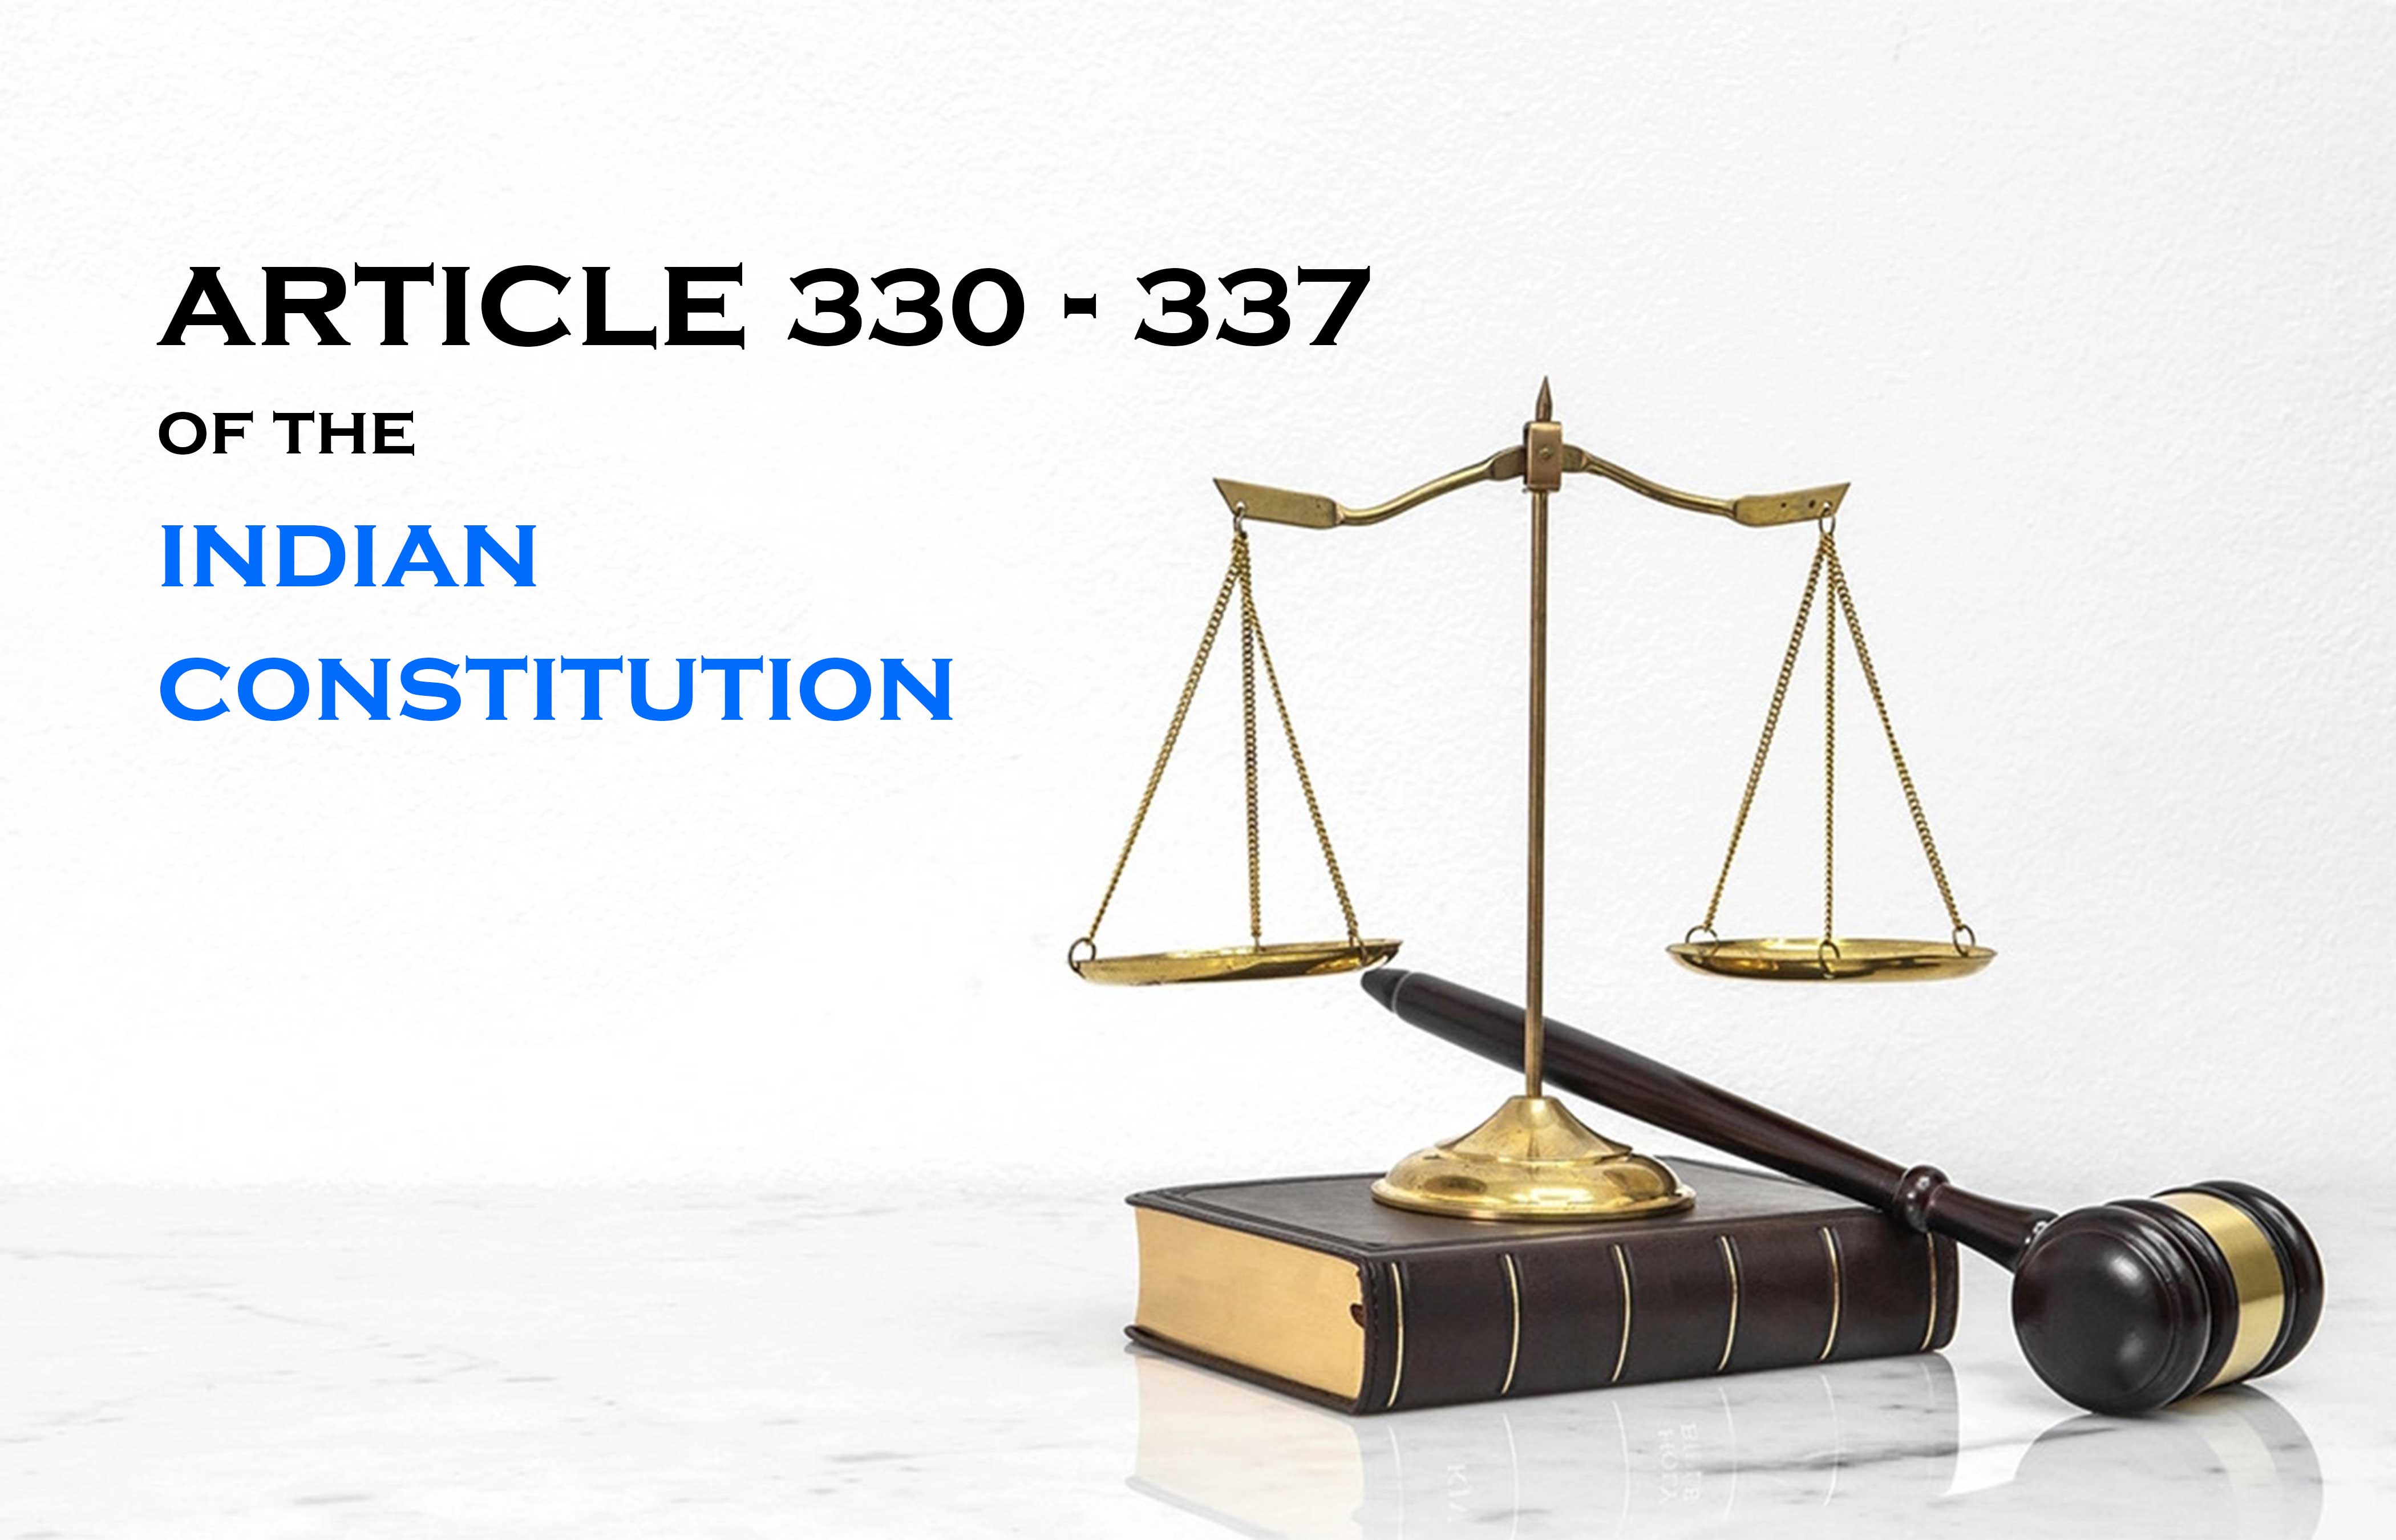 Article 330 – 337